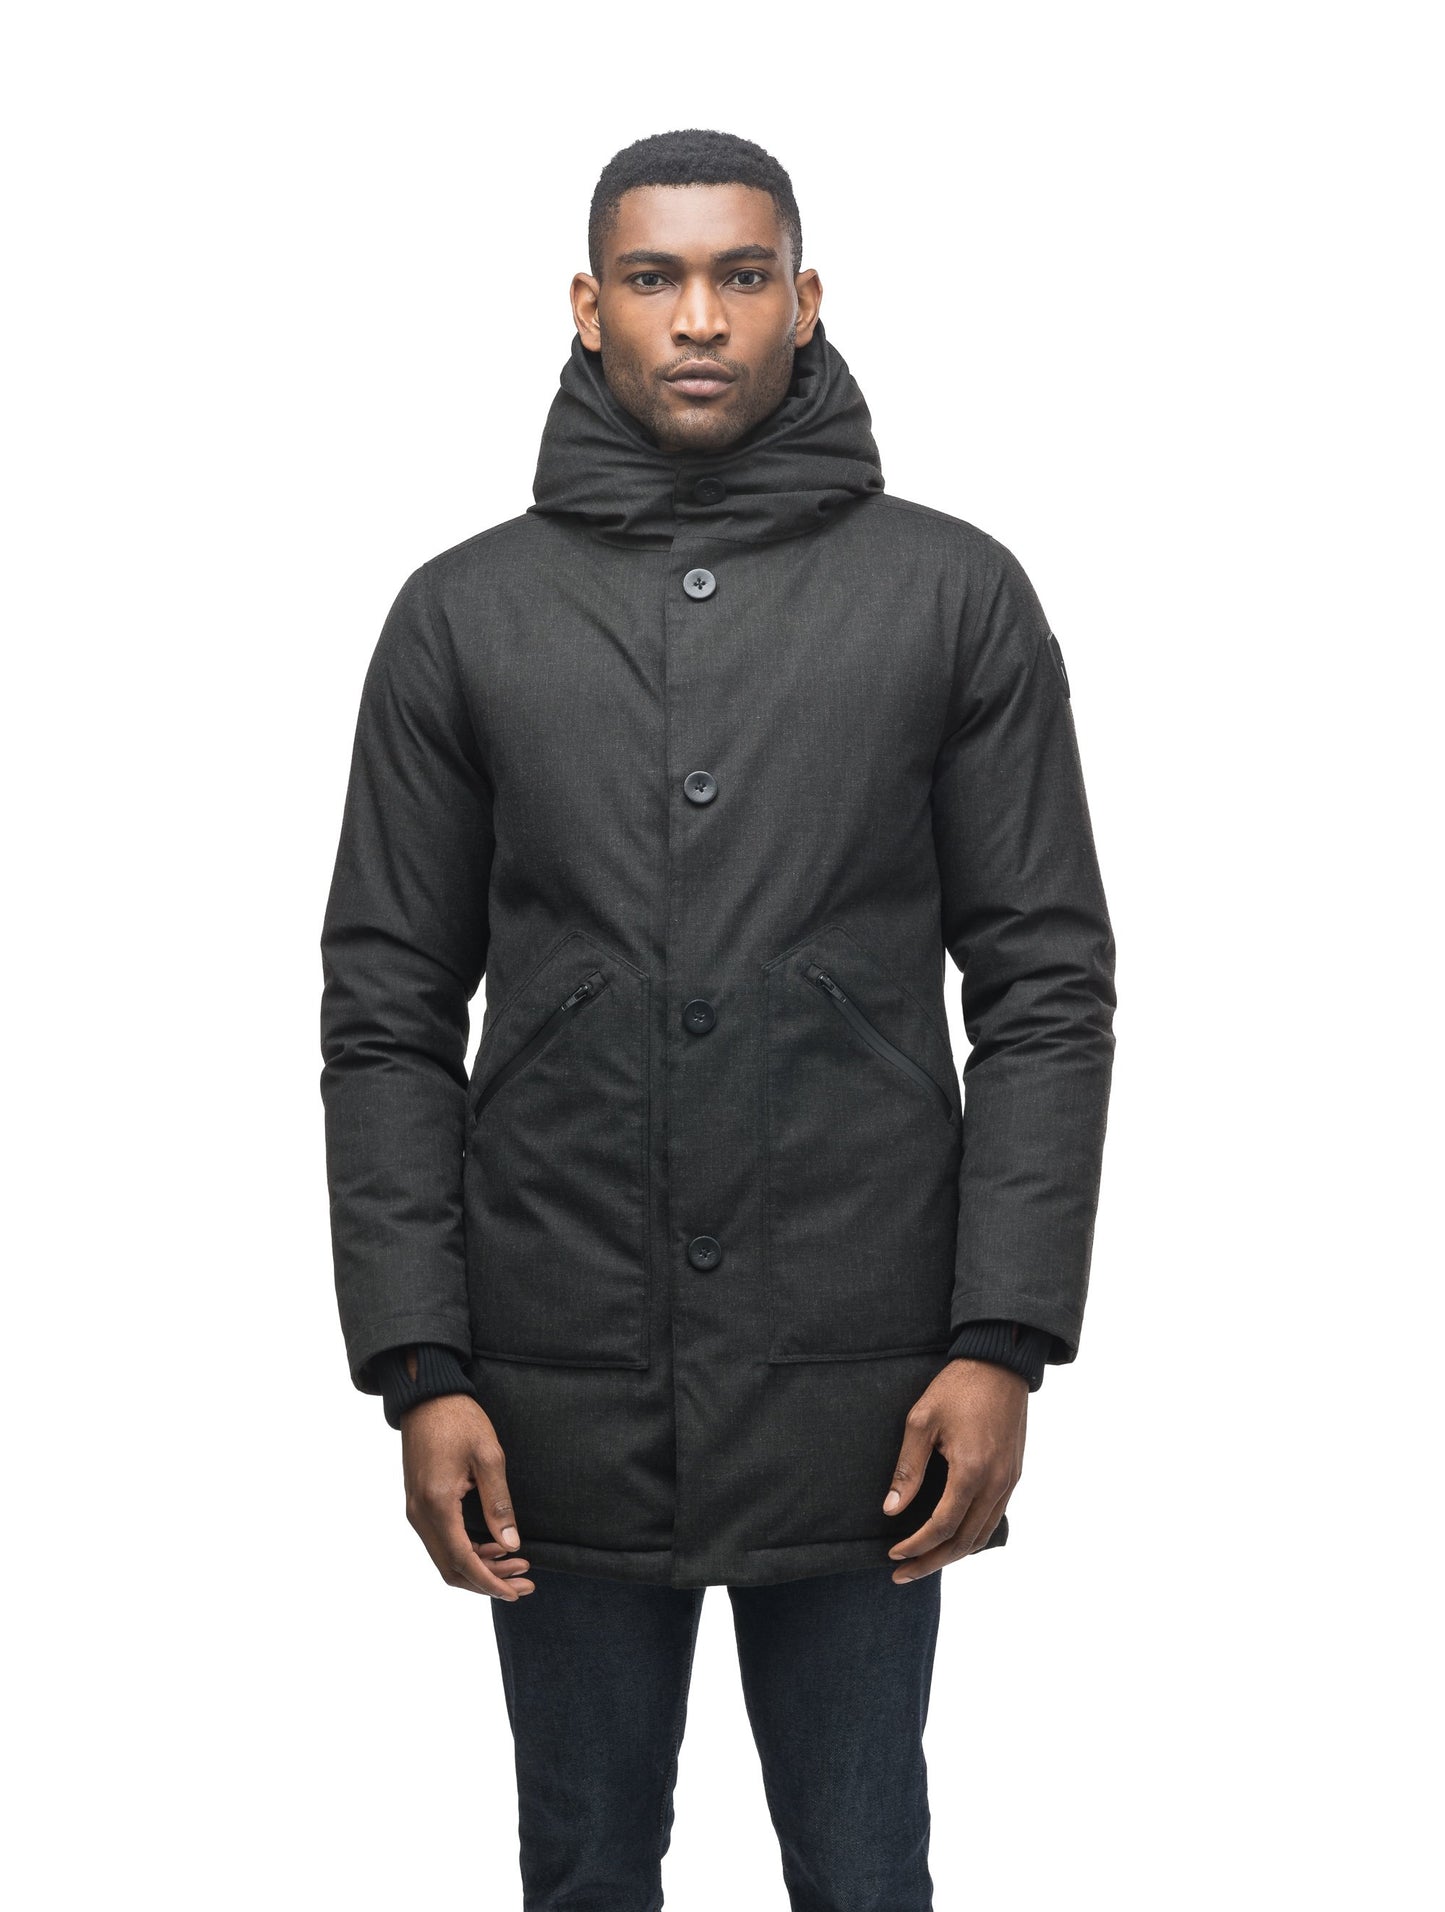 Men's fur free hooded parka with zipper and button closure placket featuring two oversized front pockets in H. Black